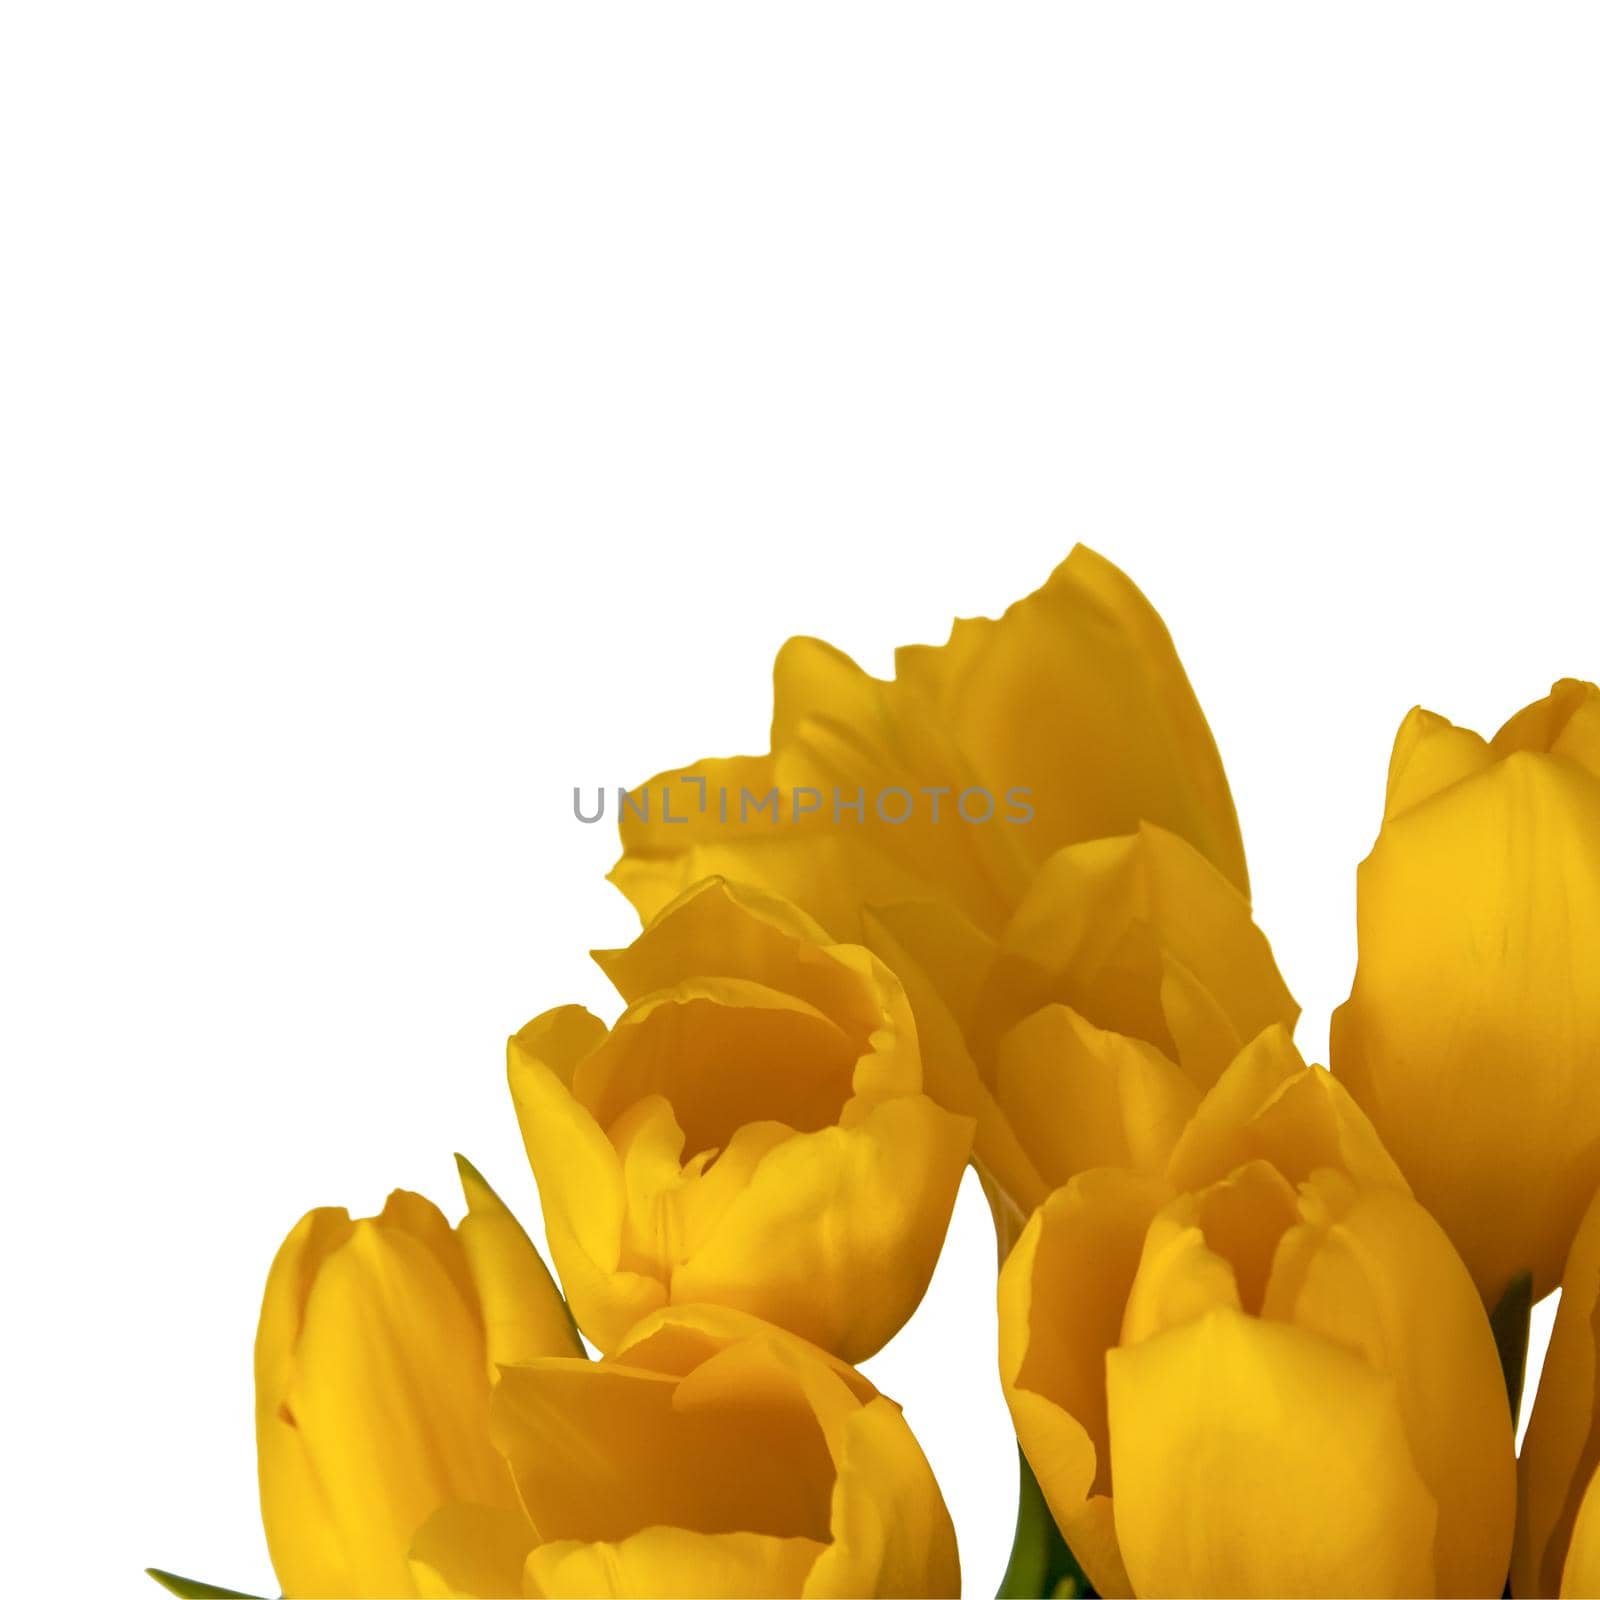 A bouquet of fresh yellow tulips on a white isolated background. Spring flowers in a vase. The concept of spring.